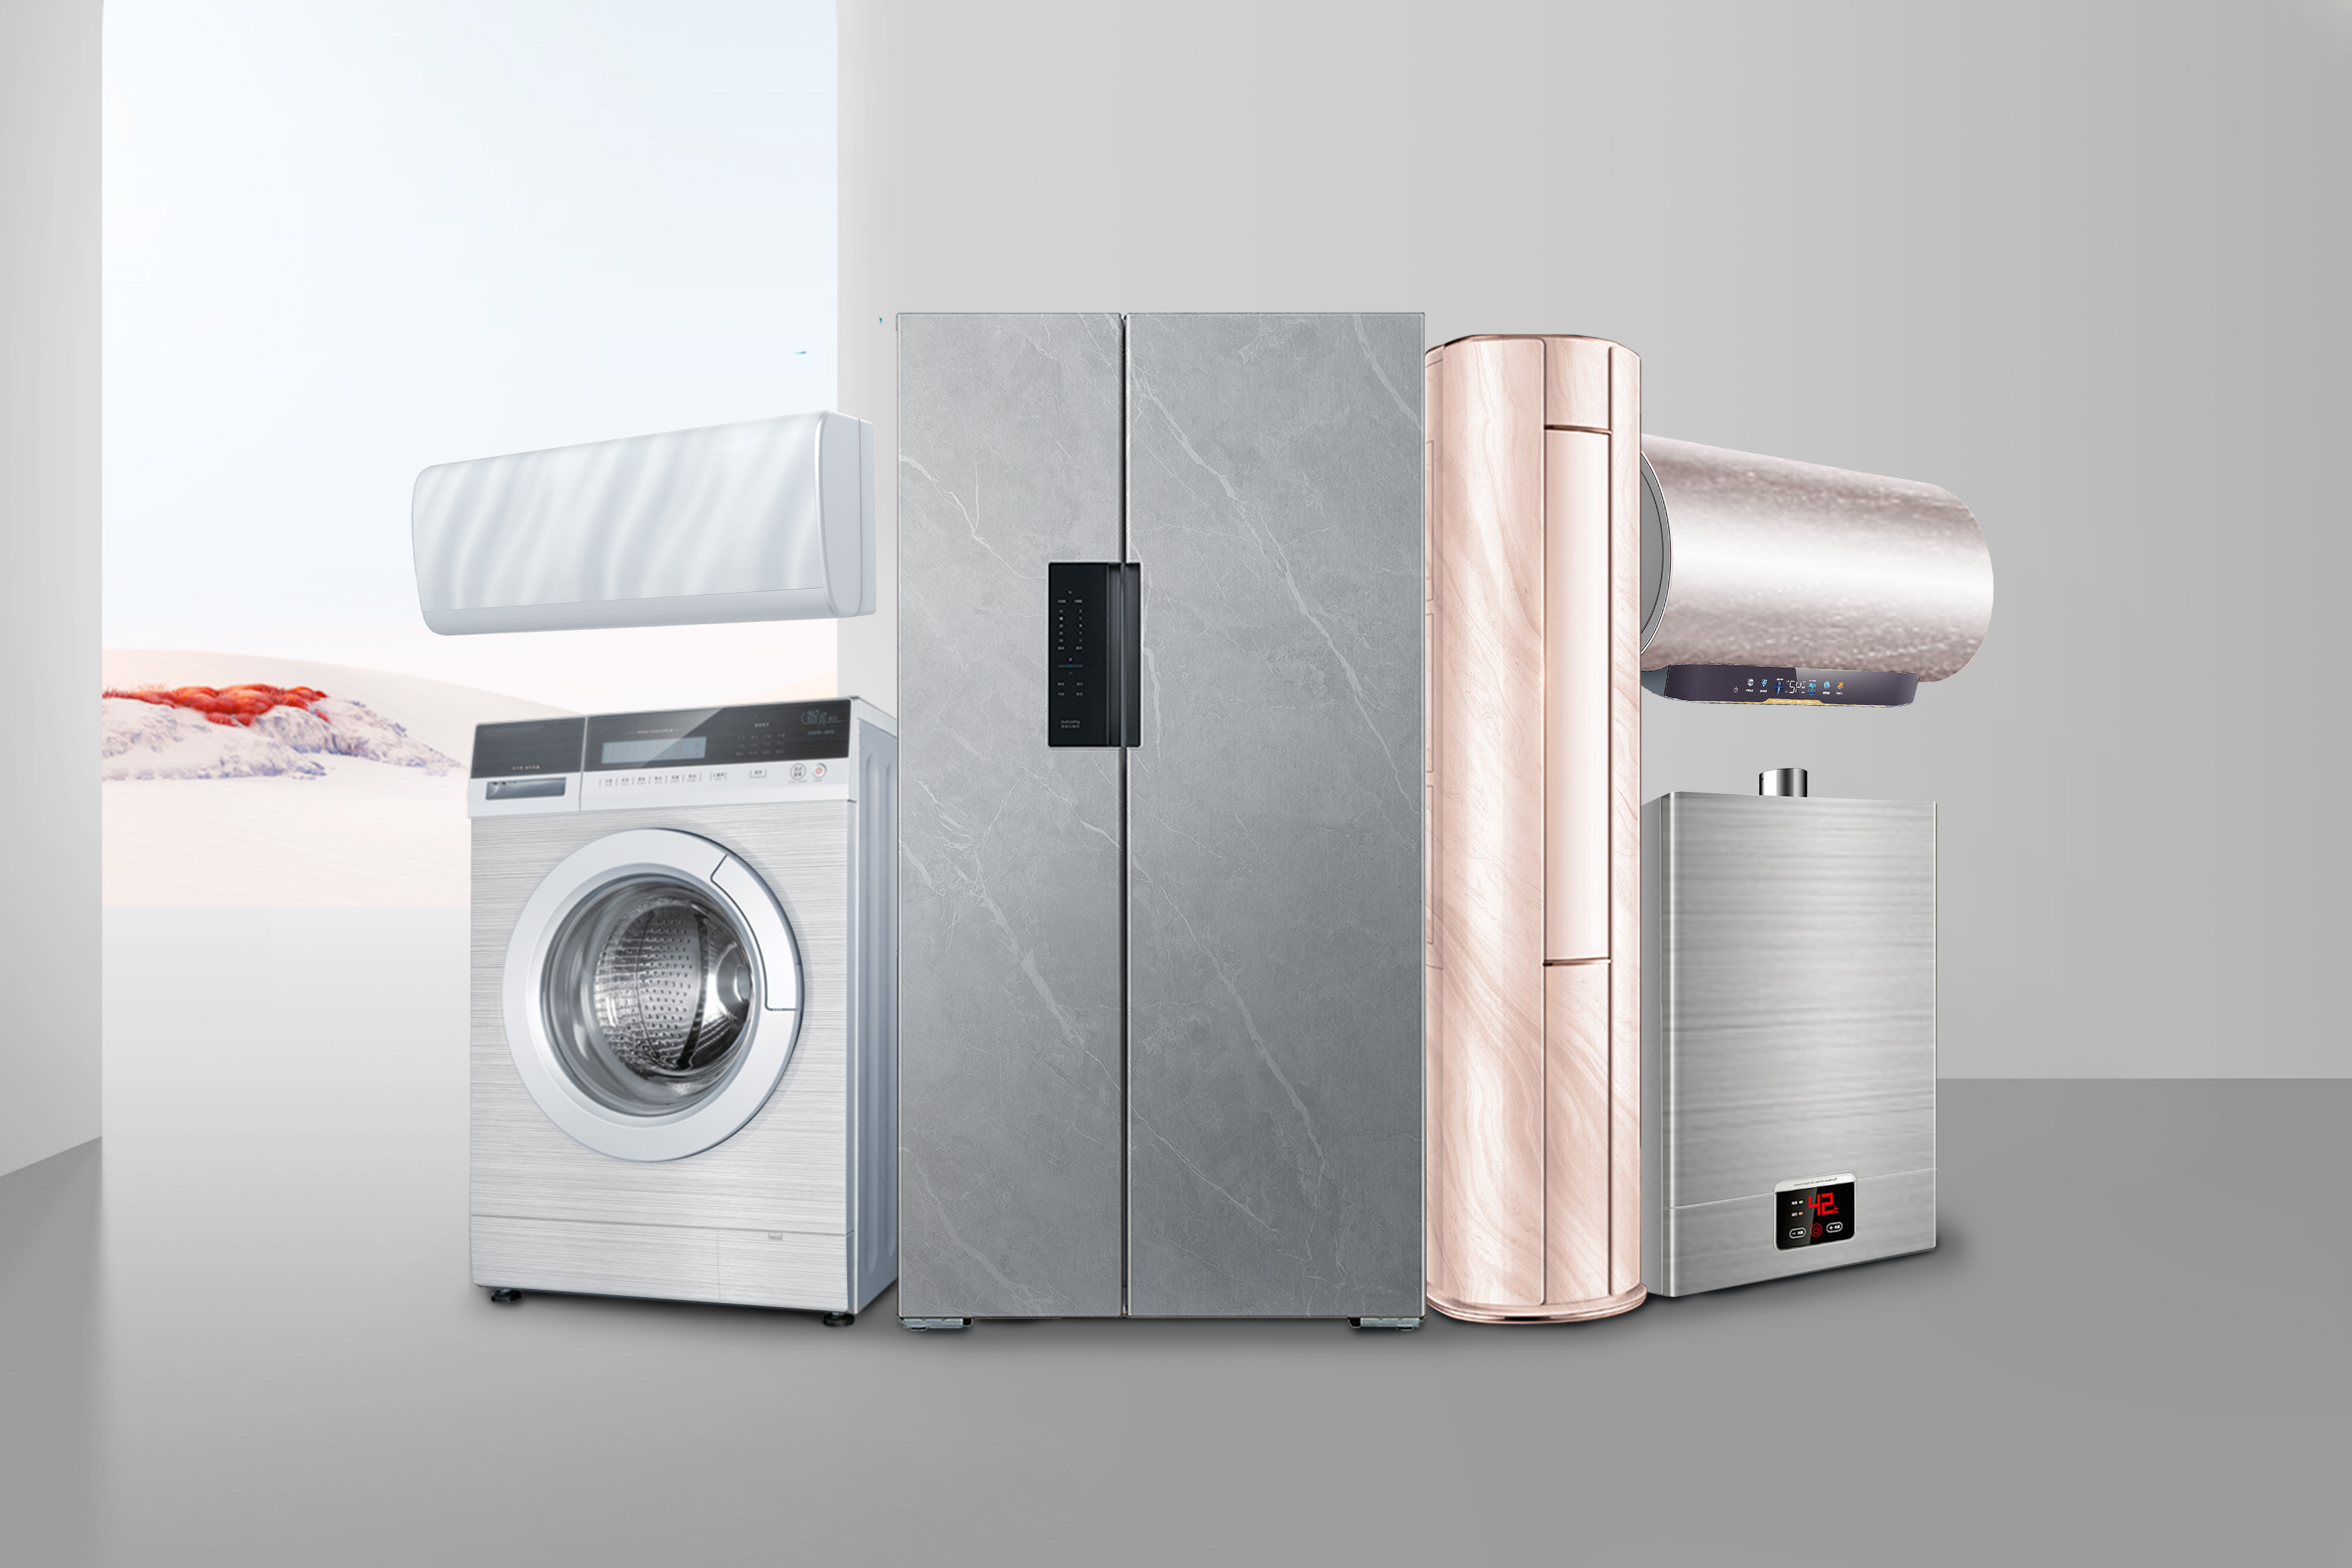 Surface Decoration of Household Appliances